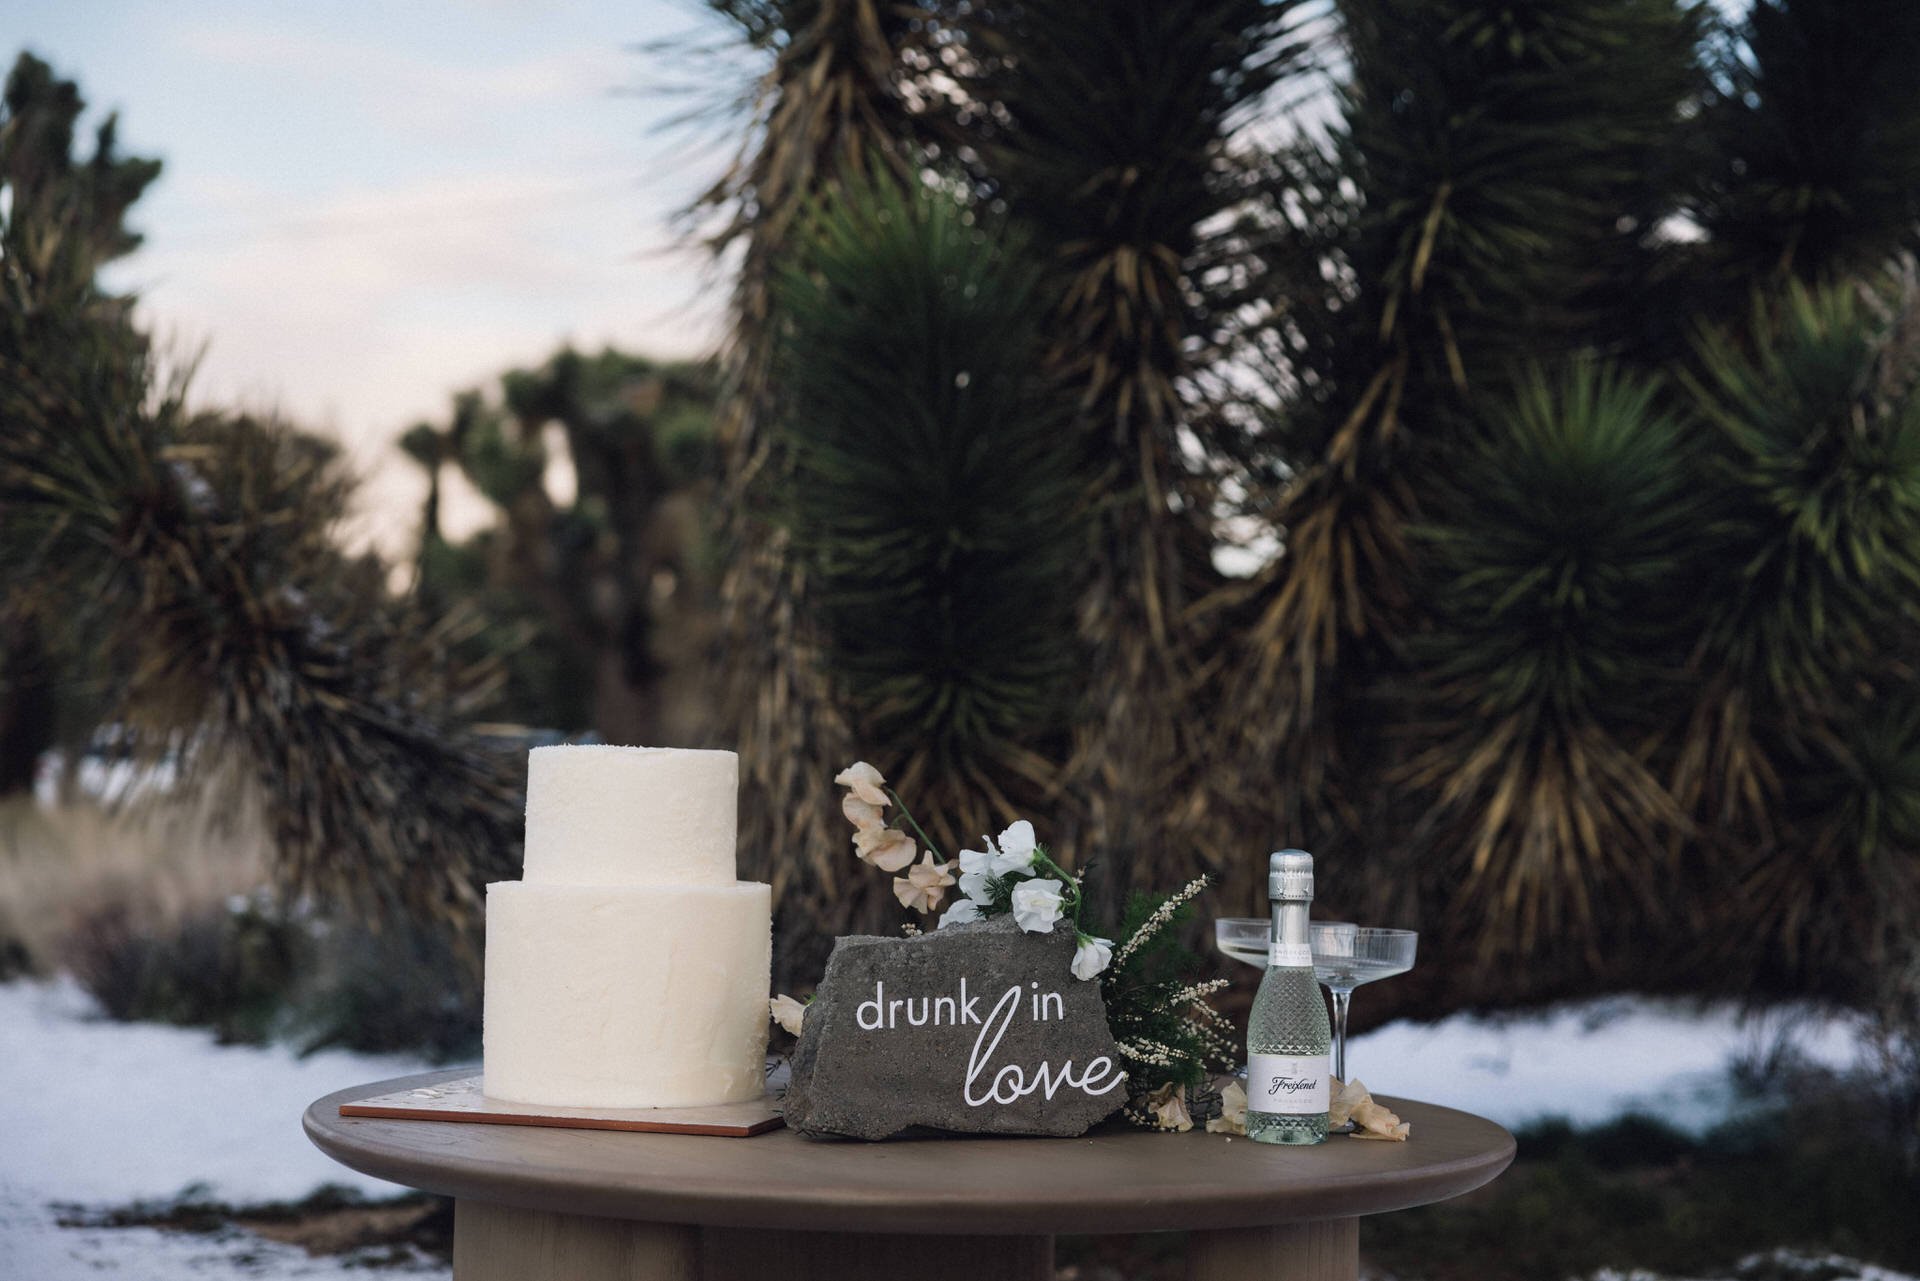 destination elopement and small wedding photographer / 4 reasons why you need a destination elopement photographer